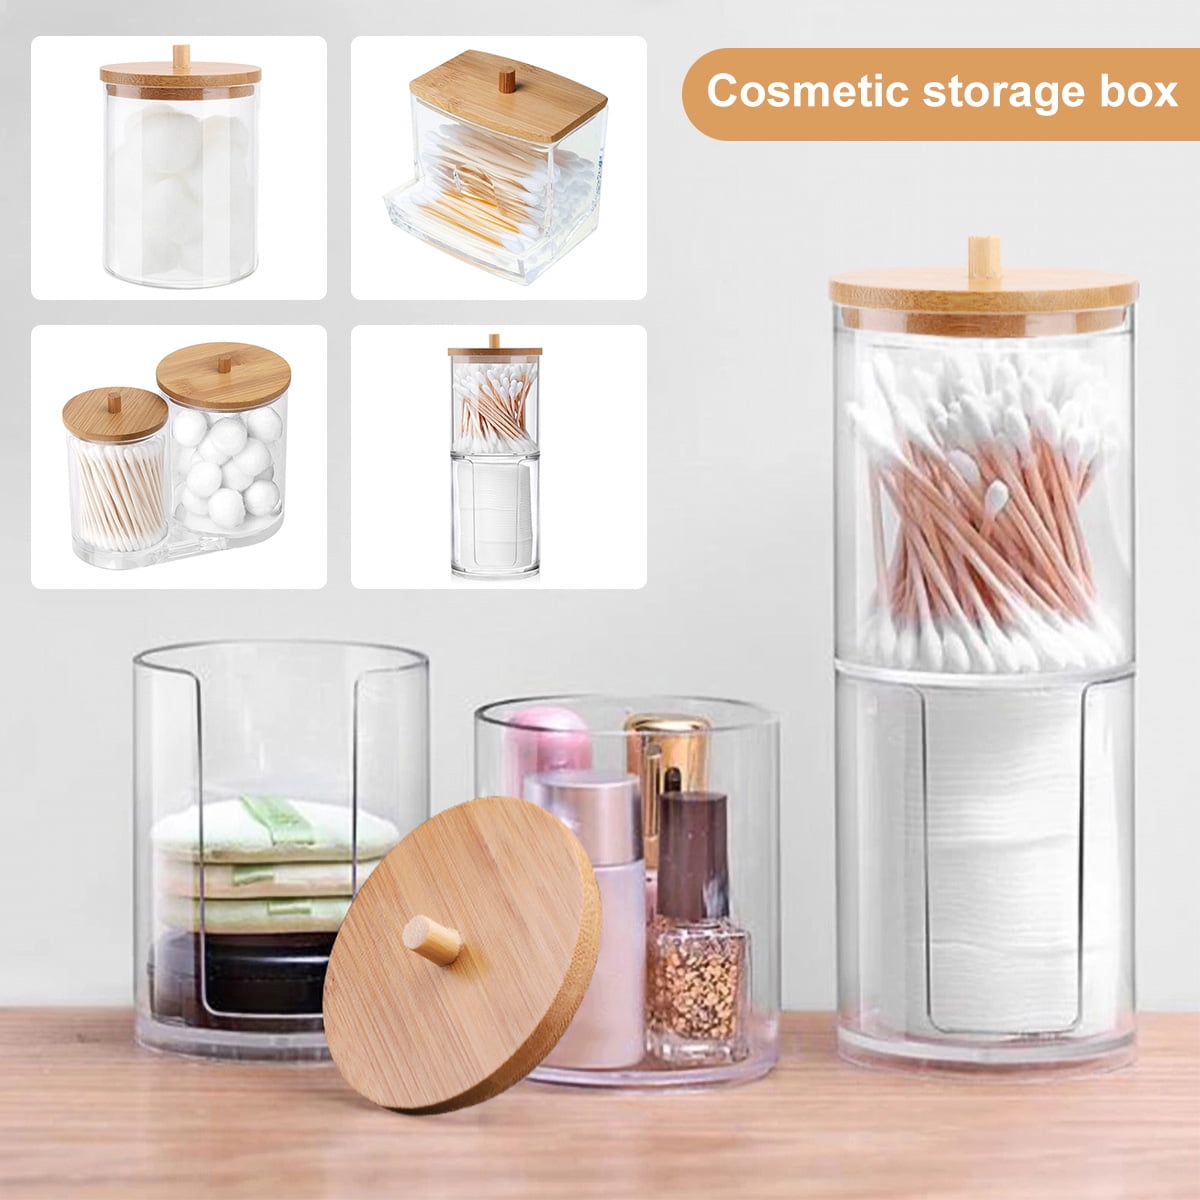 FOR COTTON SWAB Dispenser Transparent Lid Wall Mounted Storage Box